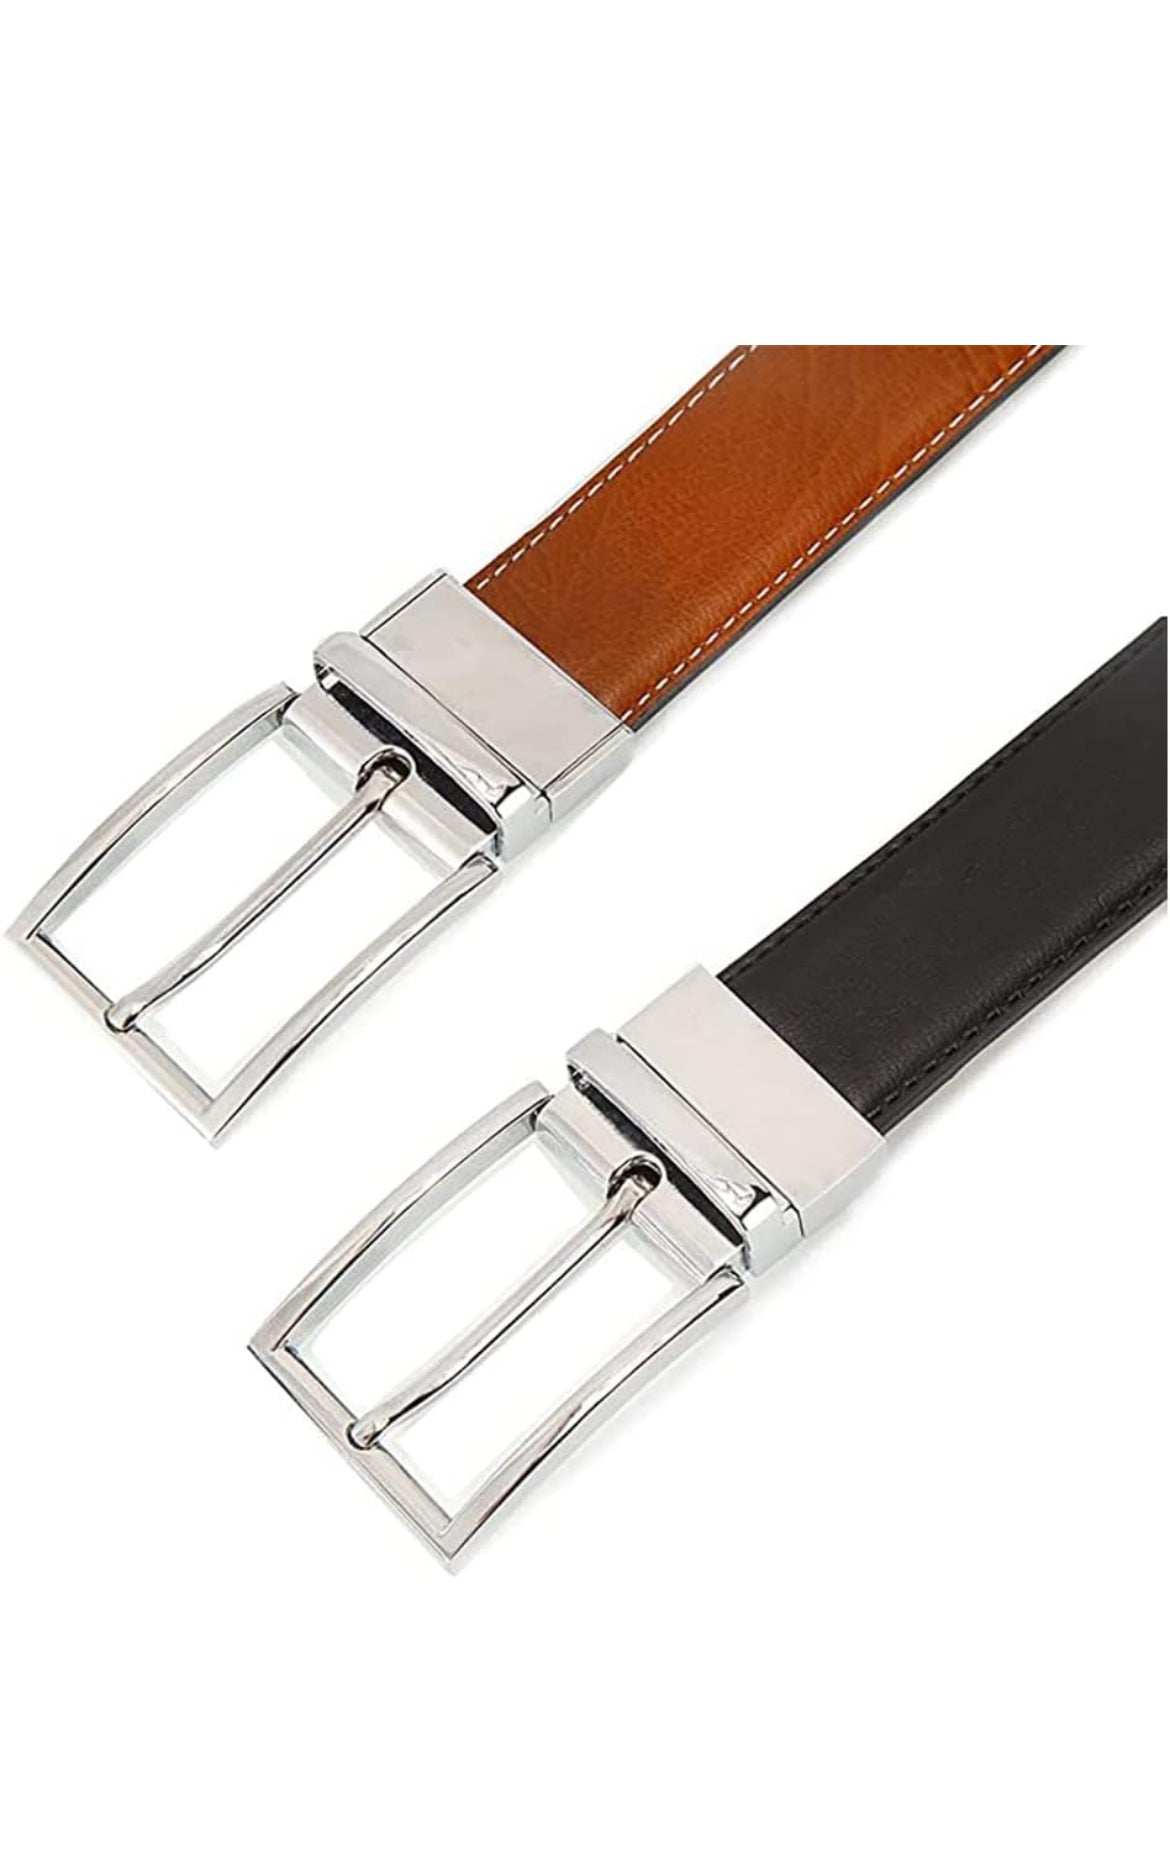 Mens Reversible Leather Belt with Chrome buckle